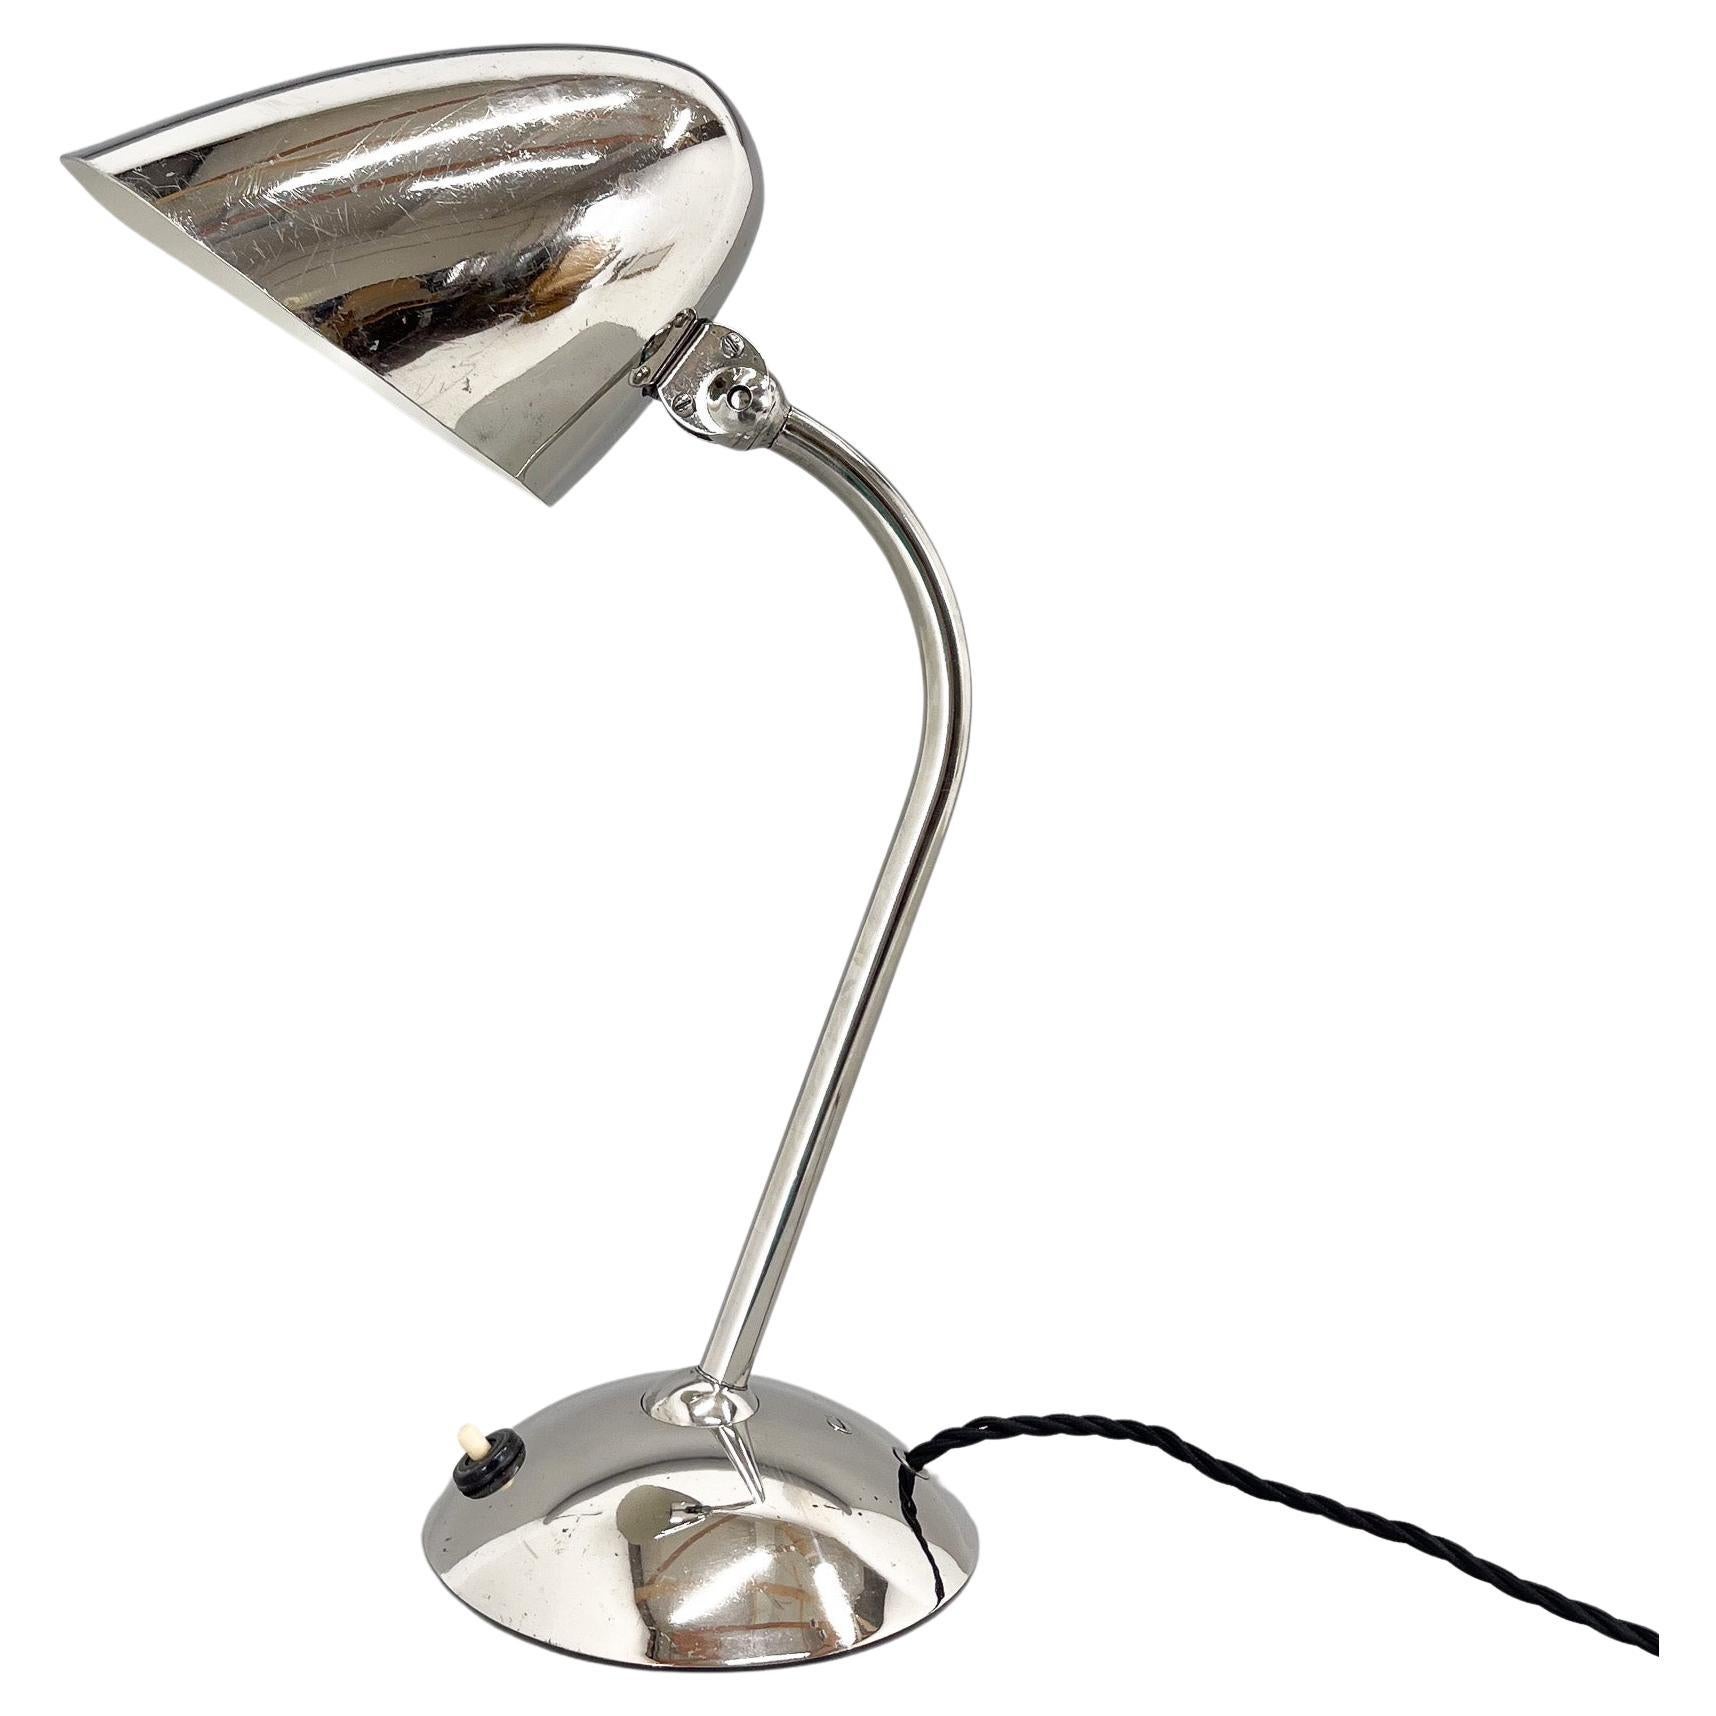 Functionalist / Bauhaus Flexible Table Lamp by Franta Anyz, 1930s